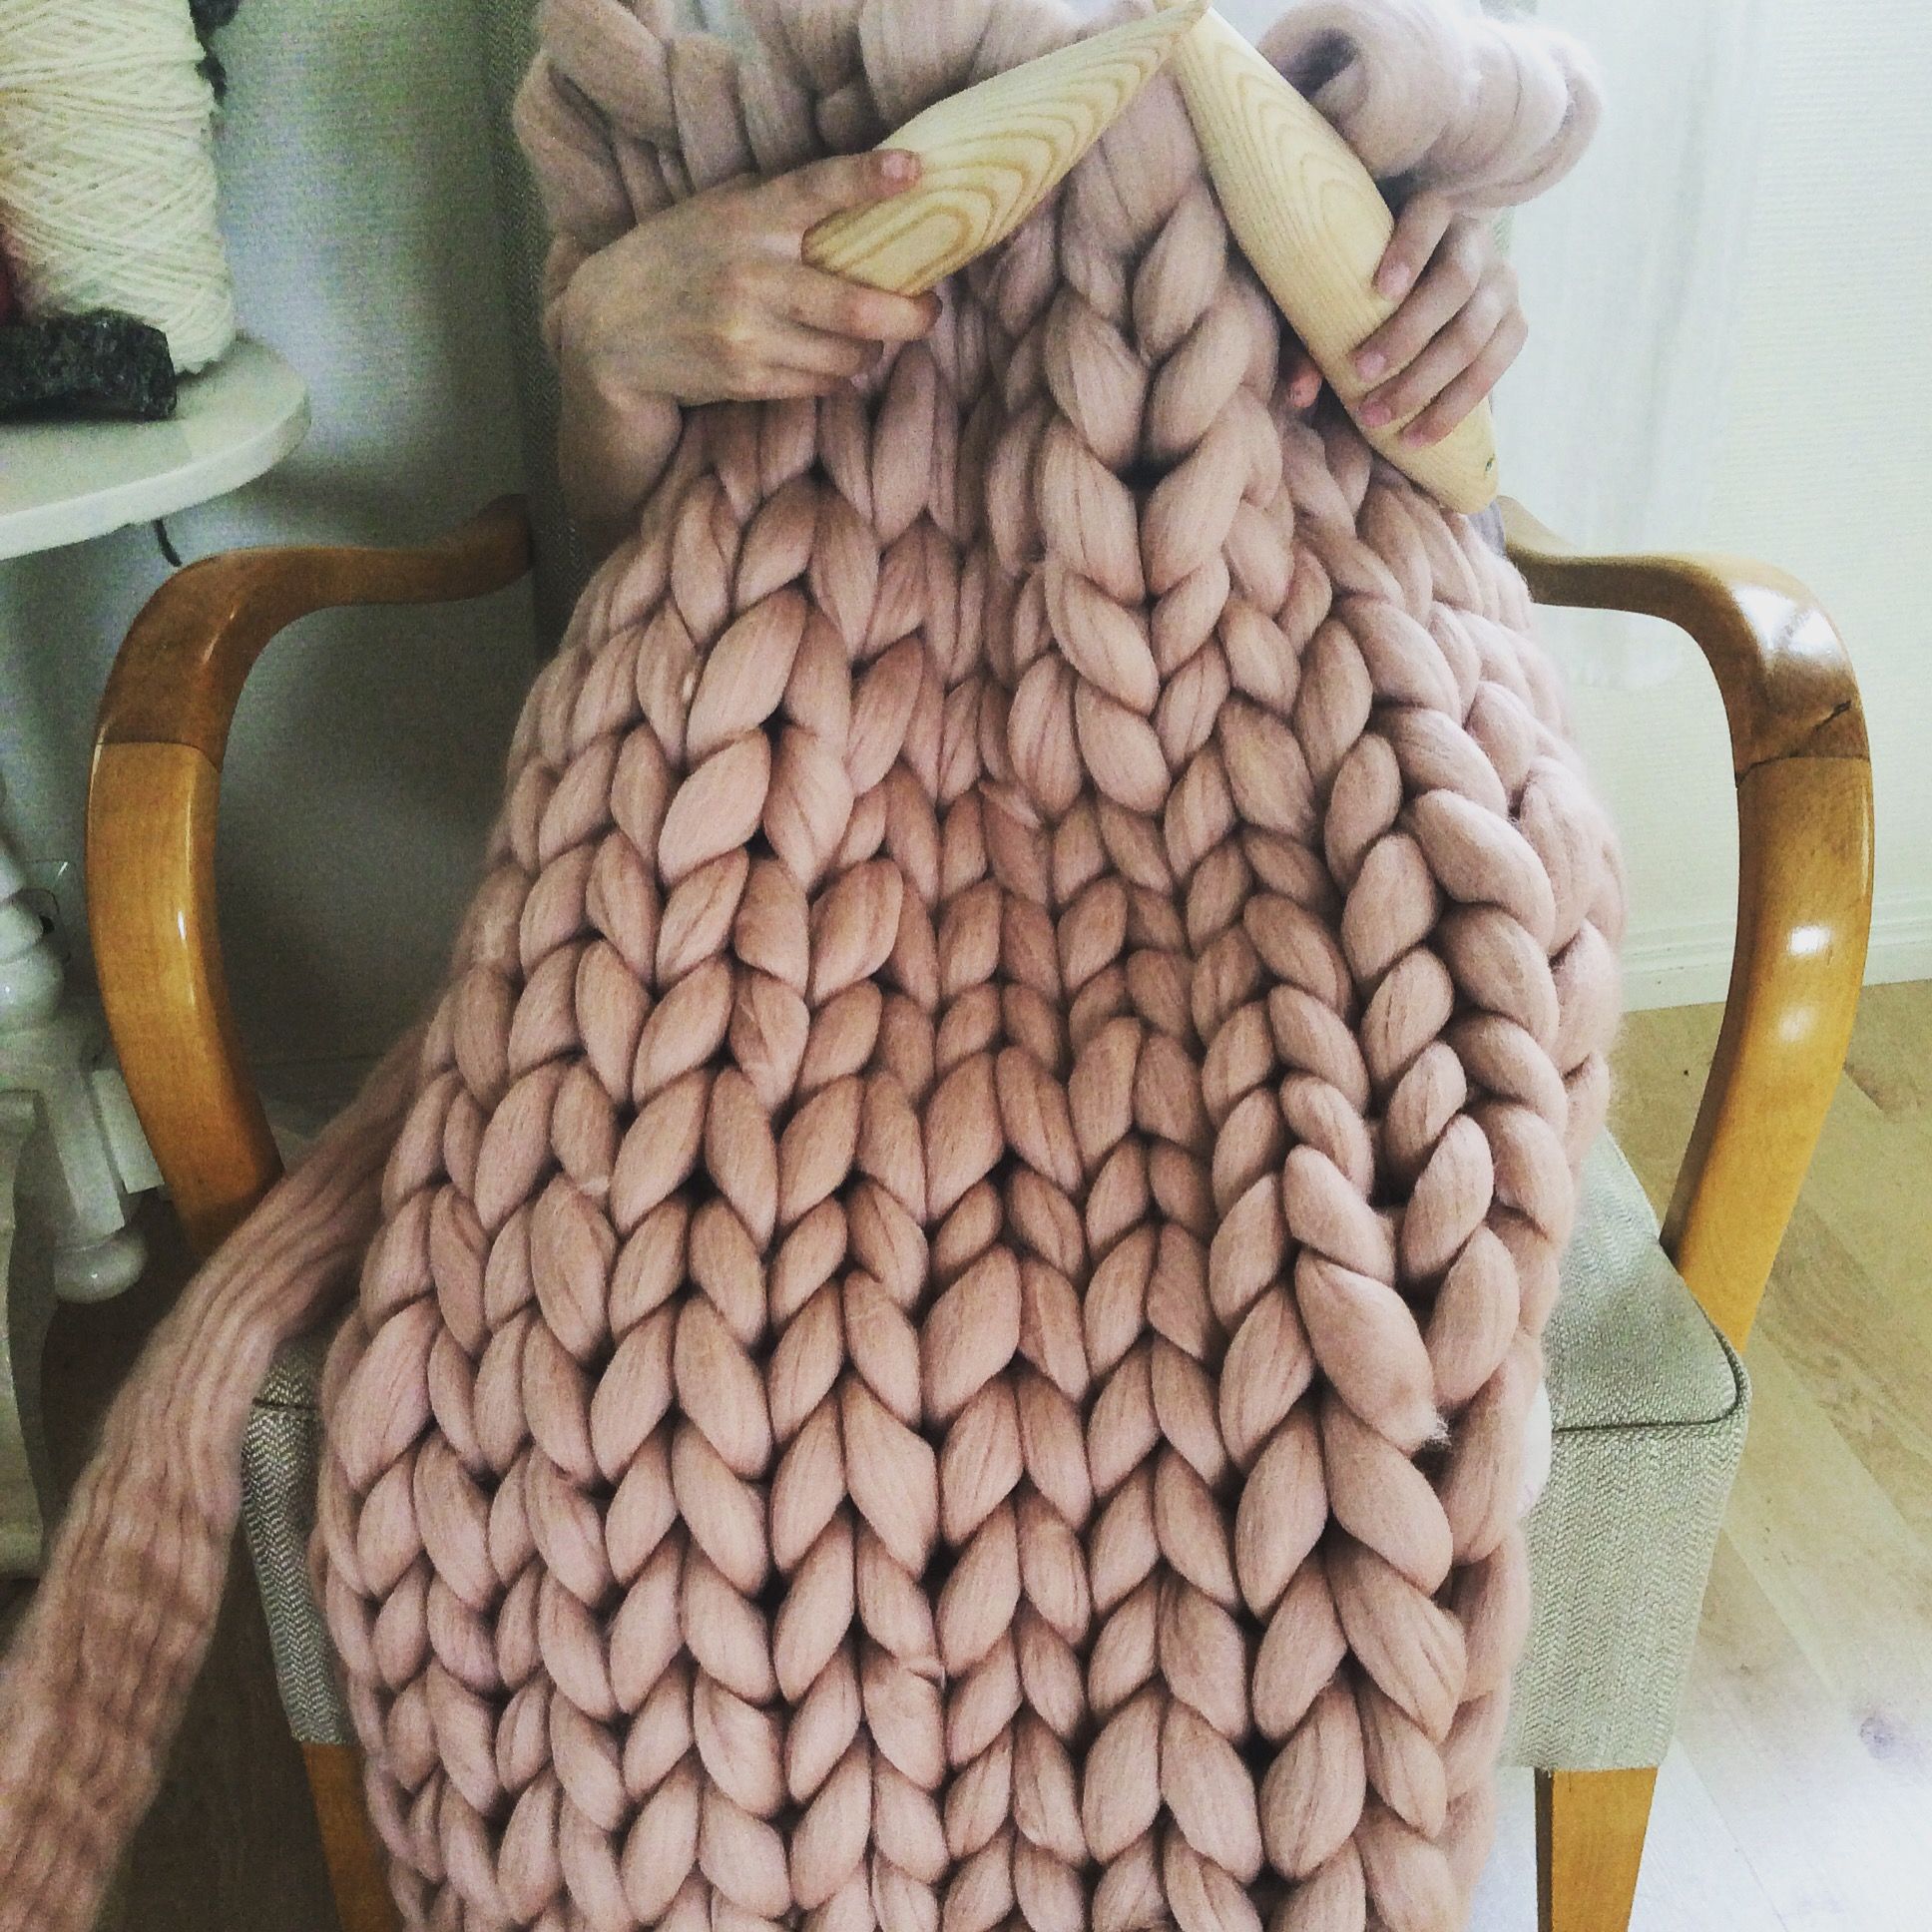 Fat knitted blanket